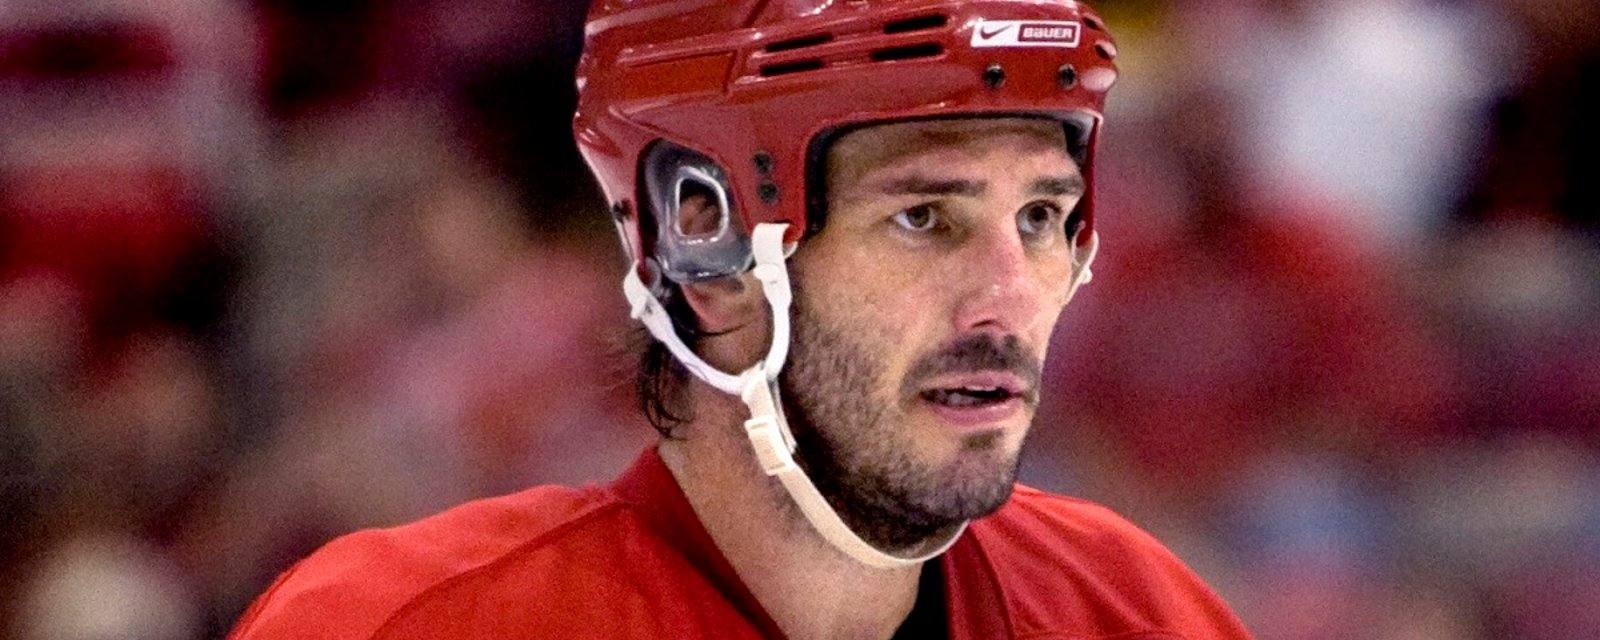 Stanley Cup Champion Andreas Lilja reveals he can no longer remember his career.